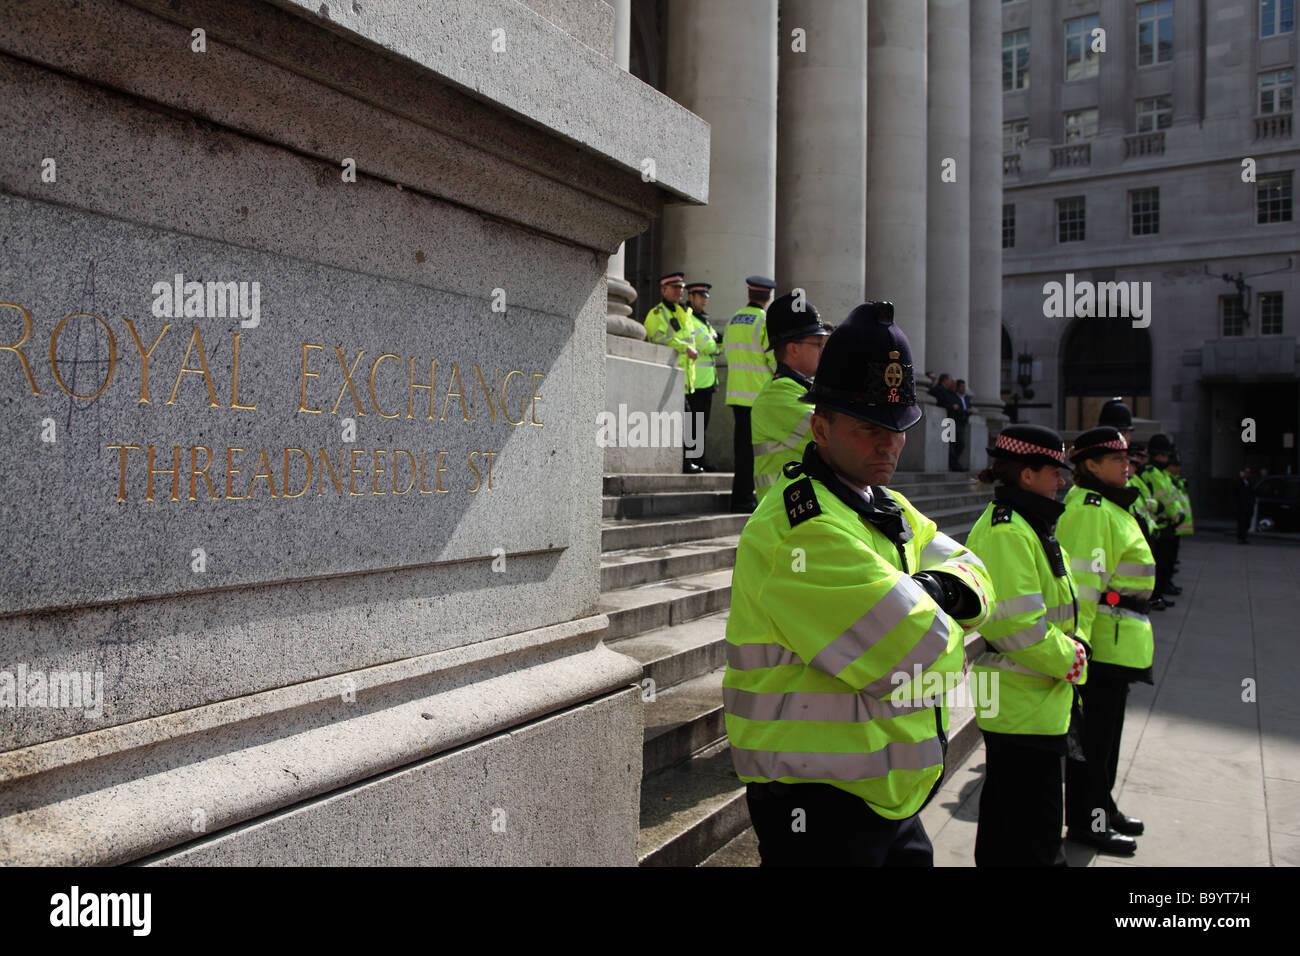 Police cordon outside the Bank of England during the 2009 G20 summit, London, UK. Stock Photo